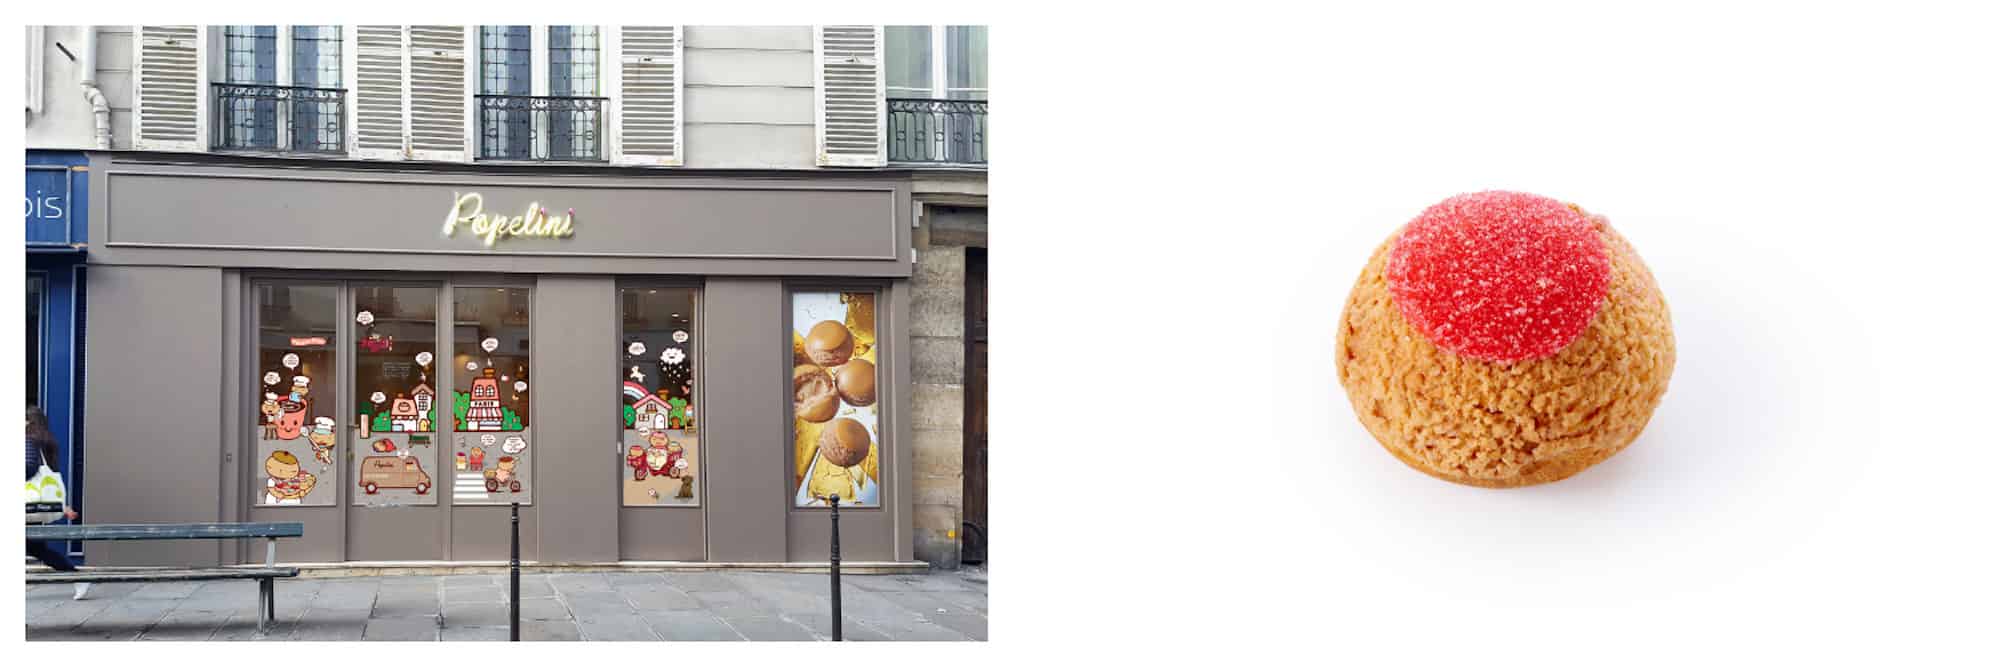 Outside chou patisserie Popelini (left). A chou with fruity filling against a white background (right).